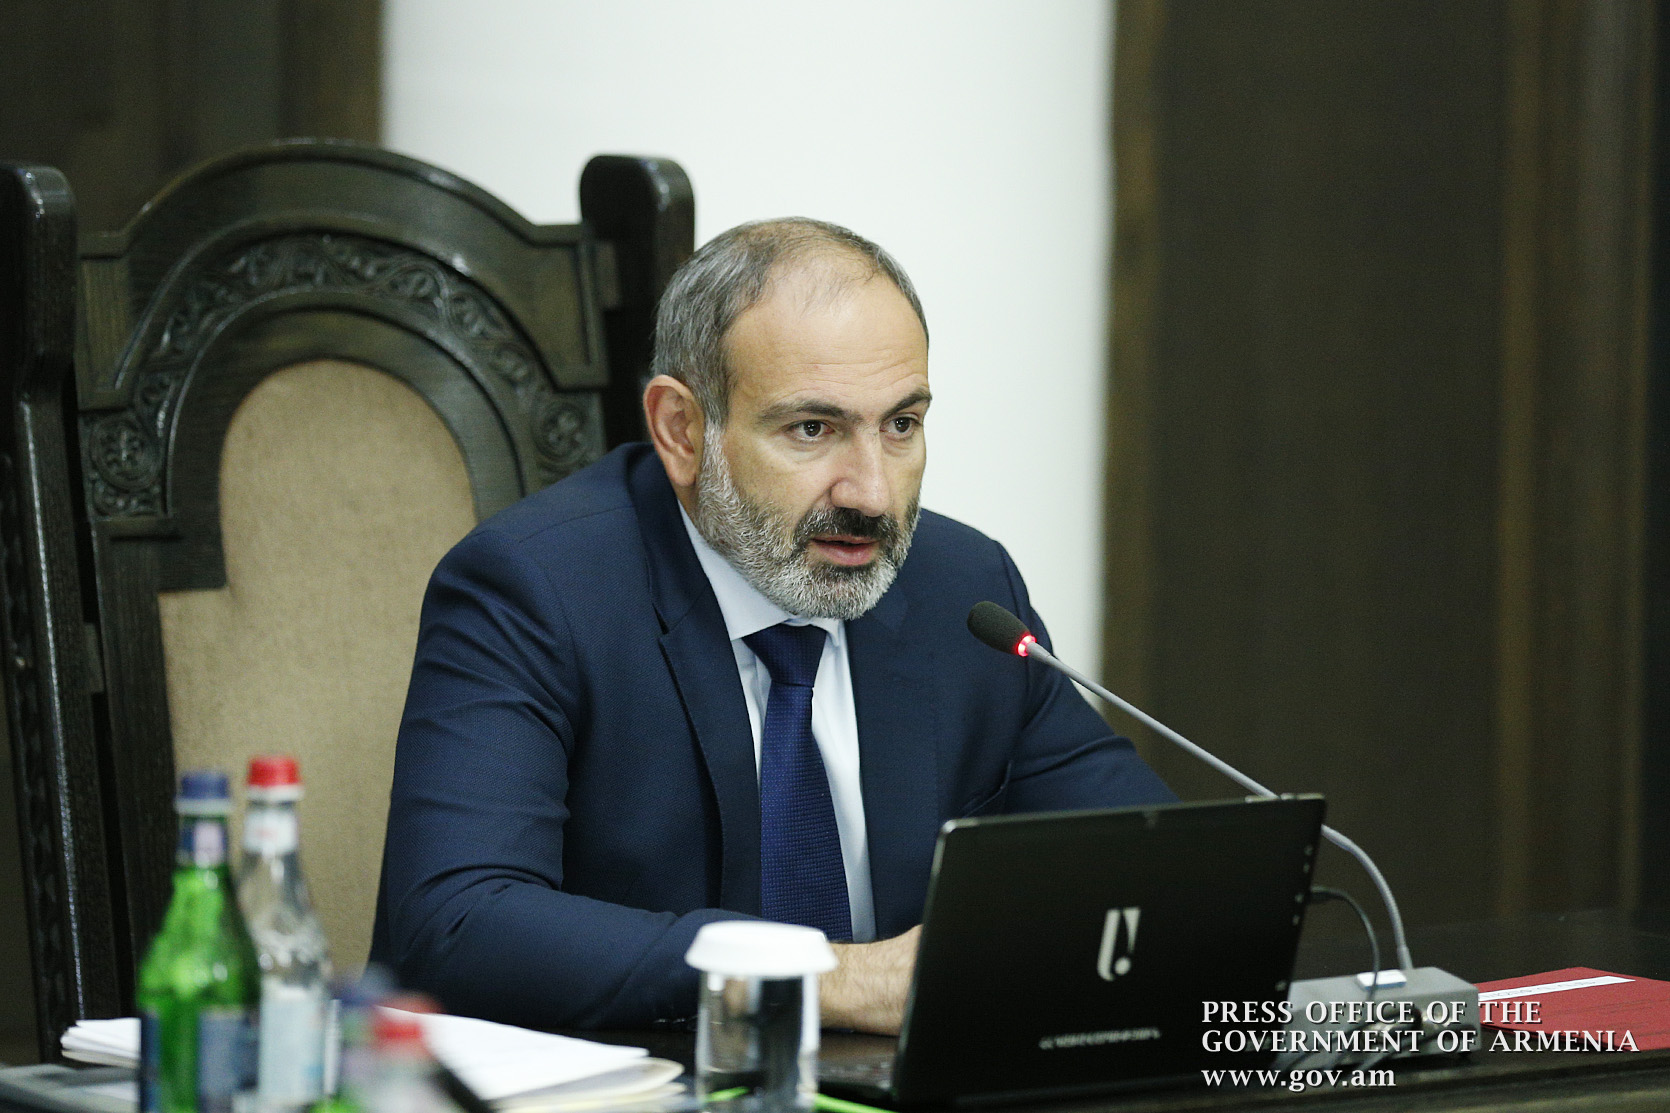 Nikol Pashinyan: ‘Over the past 100 days, we have solved the key problem: we have ensured the country’s normal functioning and economic development’